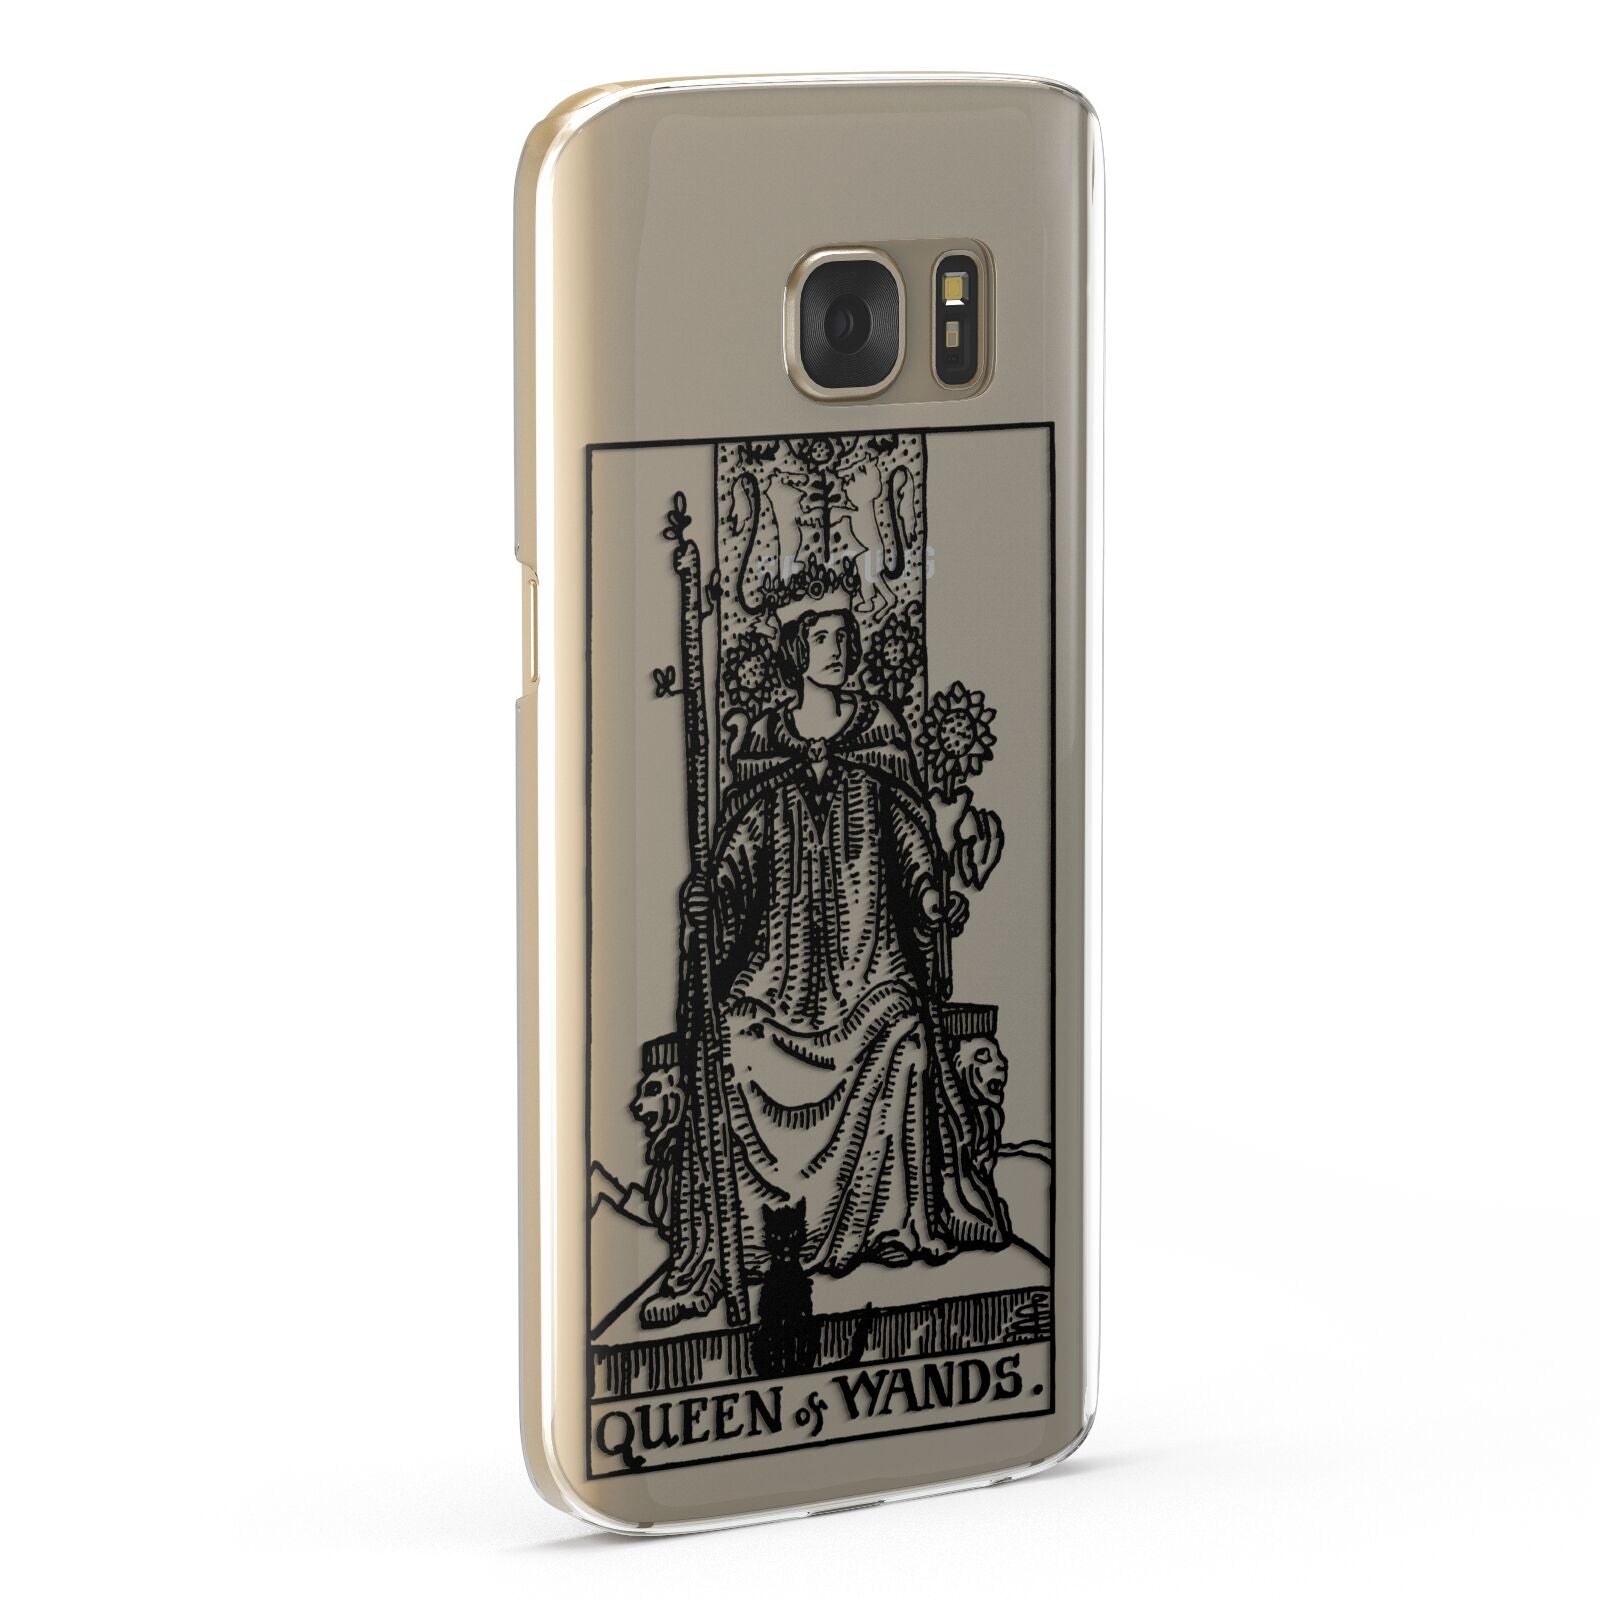 Queen of Wands Monochrome Samsung Galaxy Case Fourty Five Degrees